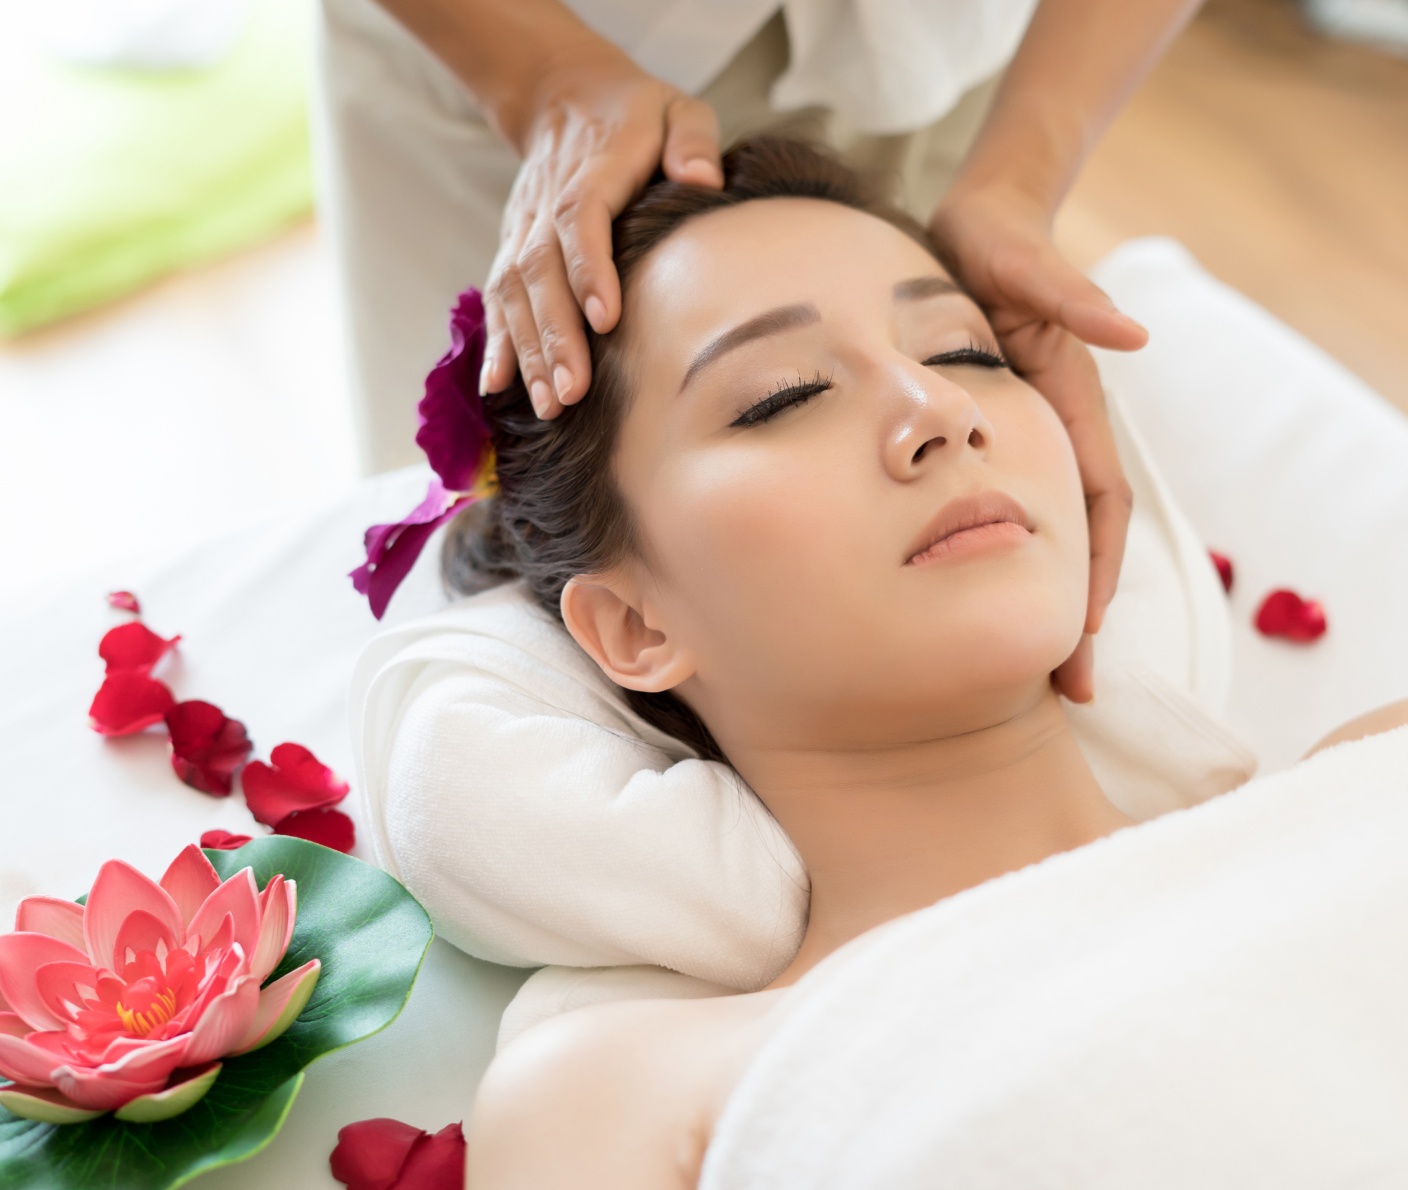 Check Out Our Specials for Massage in Winter Haven FL